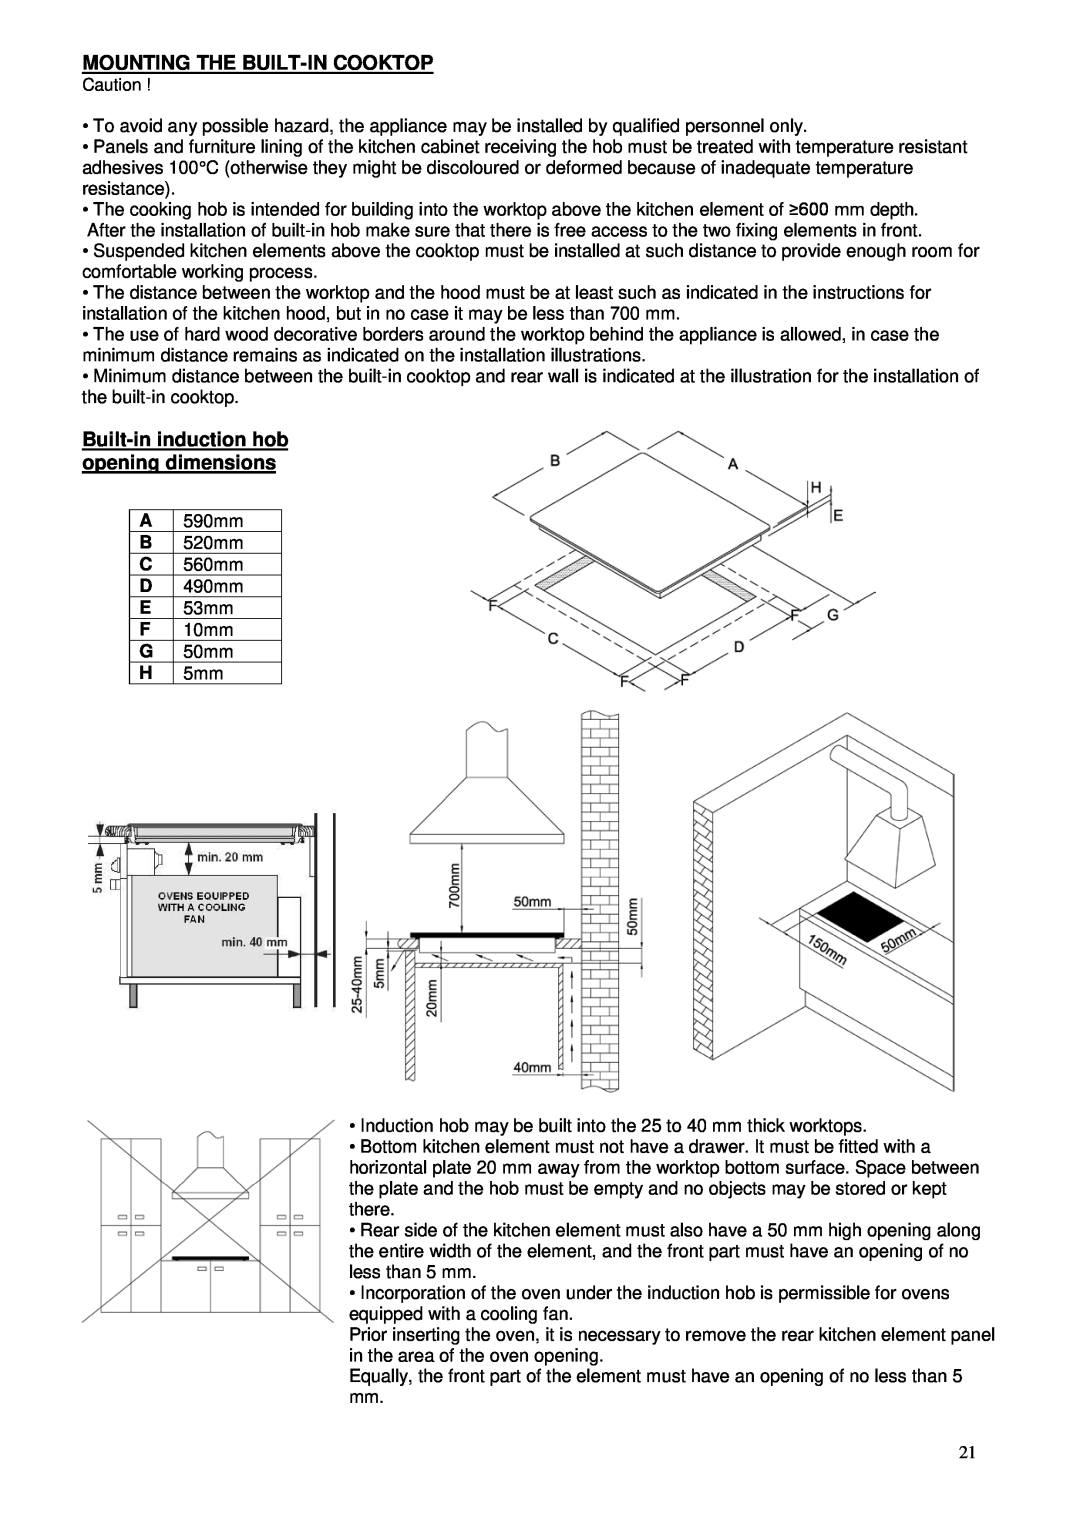 Foster 7372 241 user manual Mounting The Built-Incooktop, Built-ininduction hob opening dimensions 